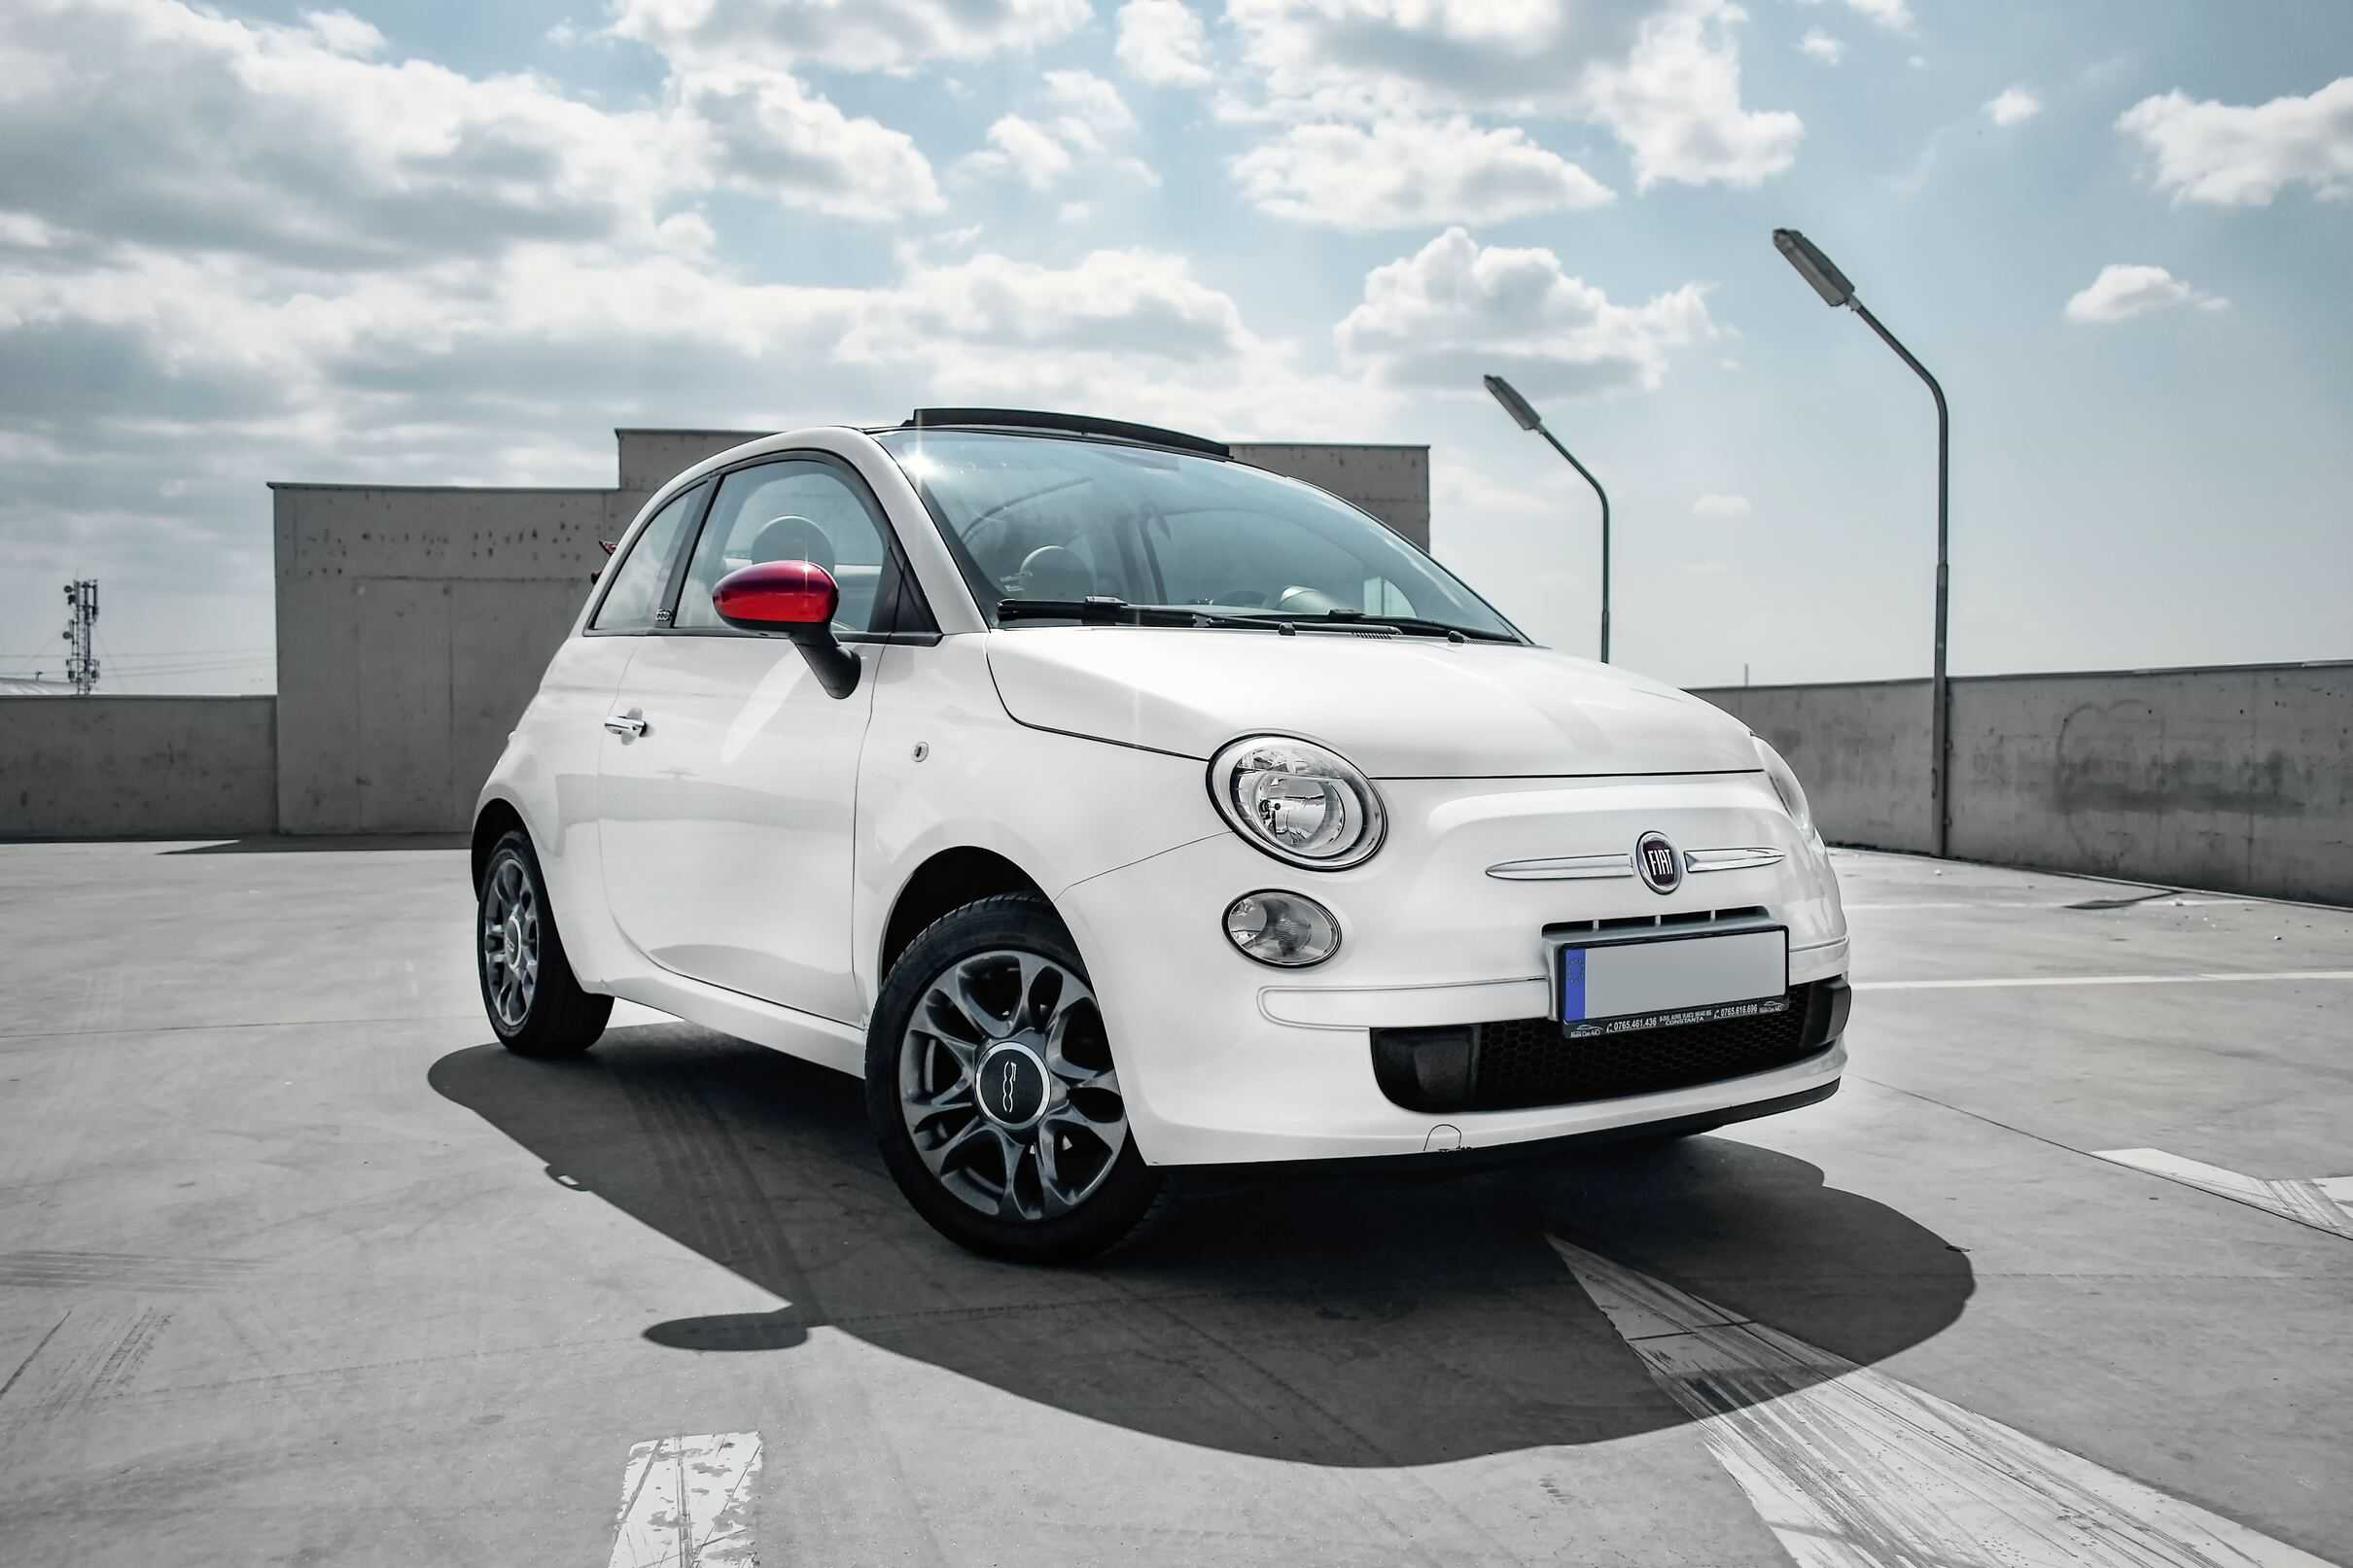 Fiat 500 vs Fiat 500 Abarth - What's the difference?